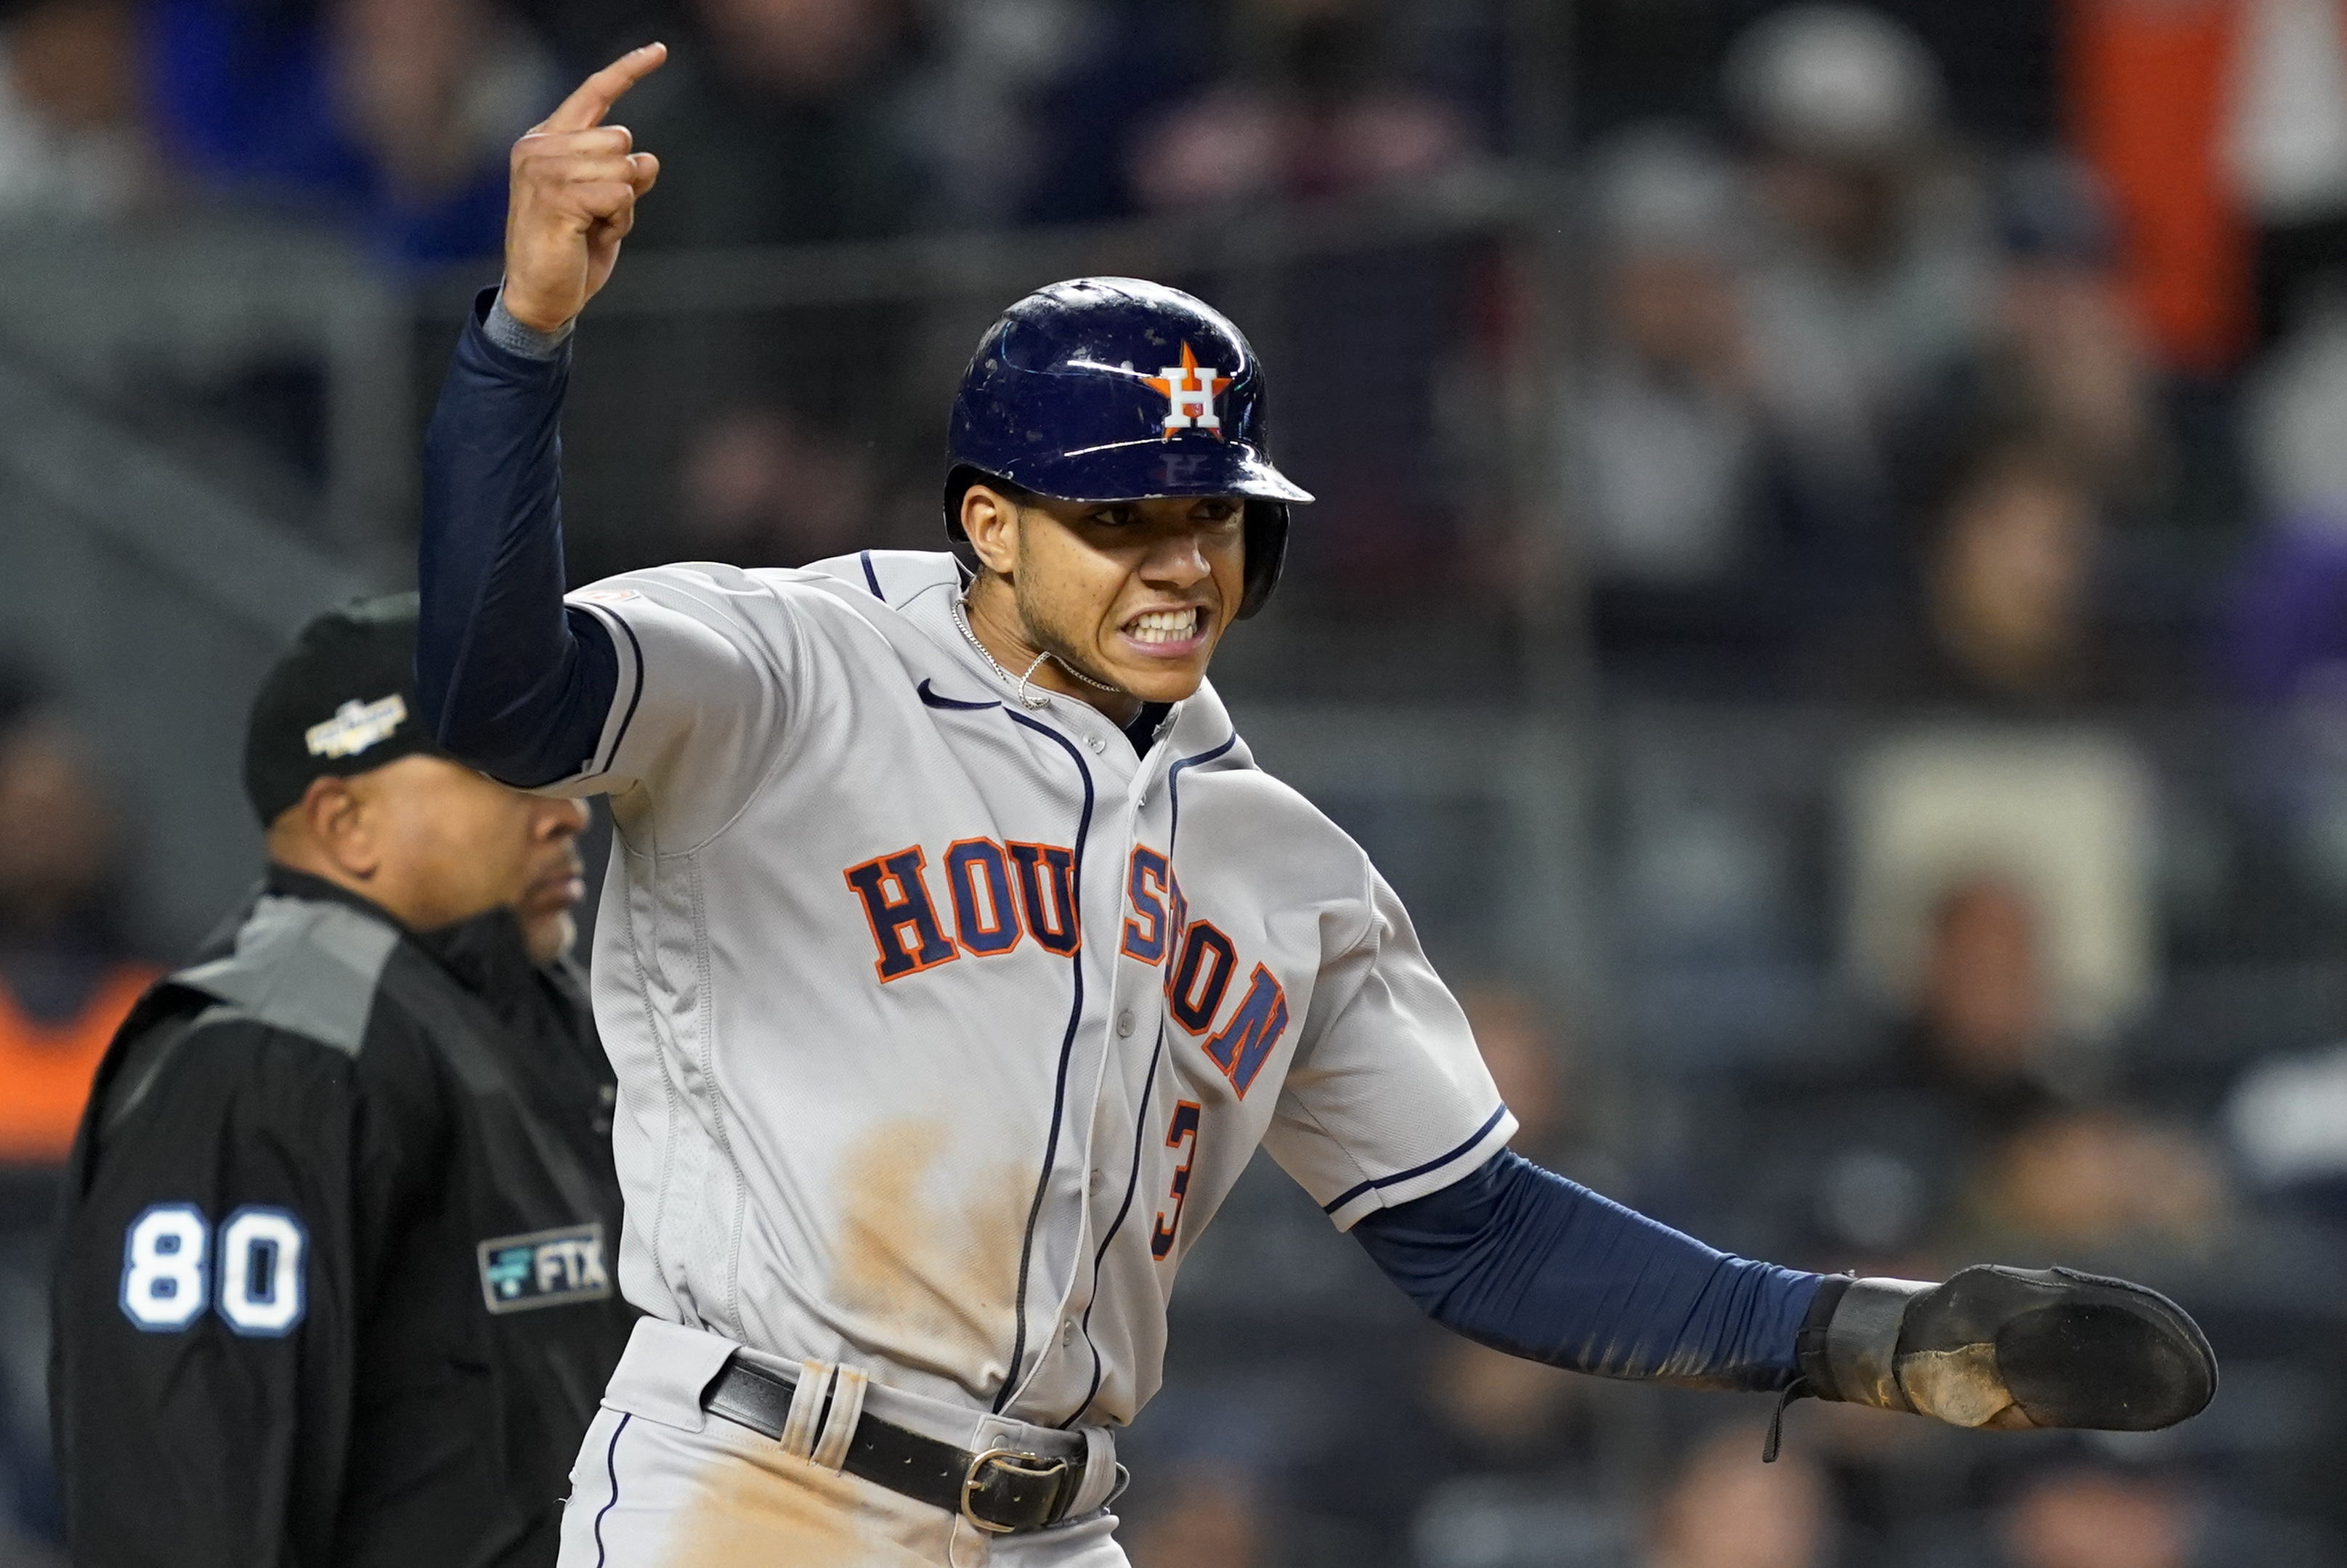 Astros vs. Yankees ALCS 2022: Looking back at the history of bad